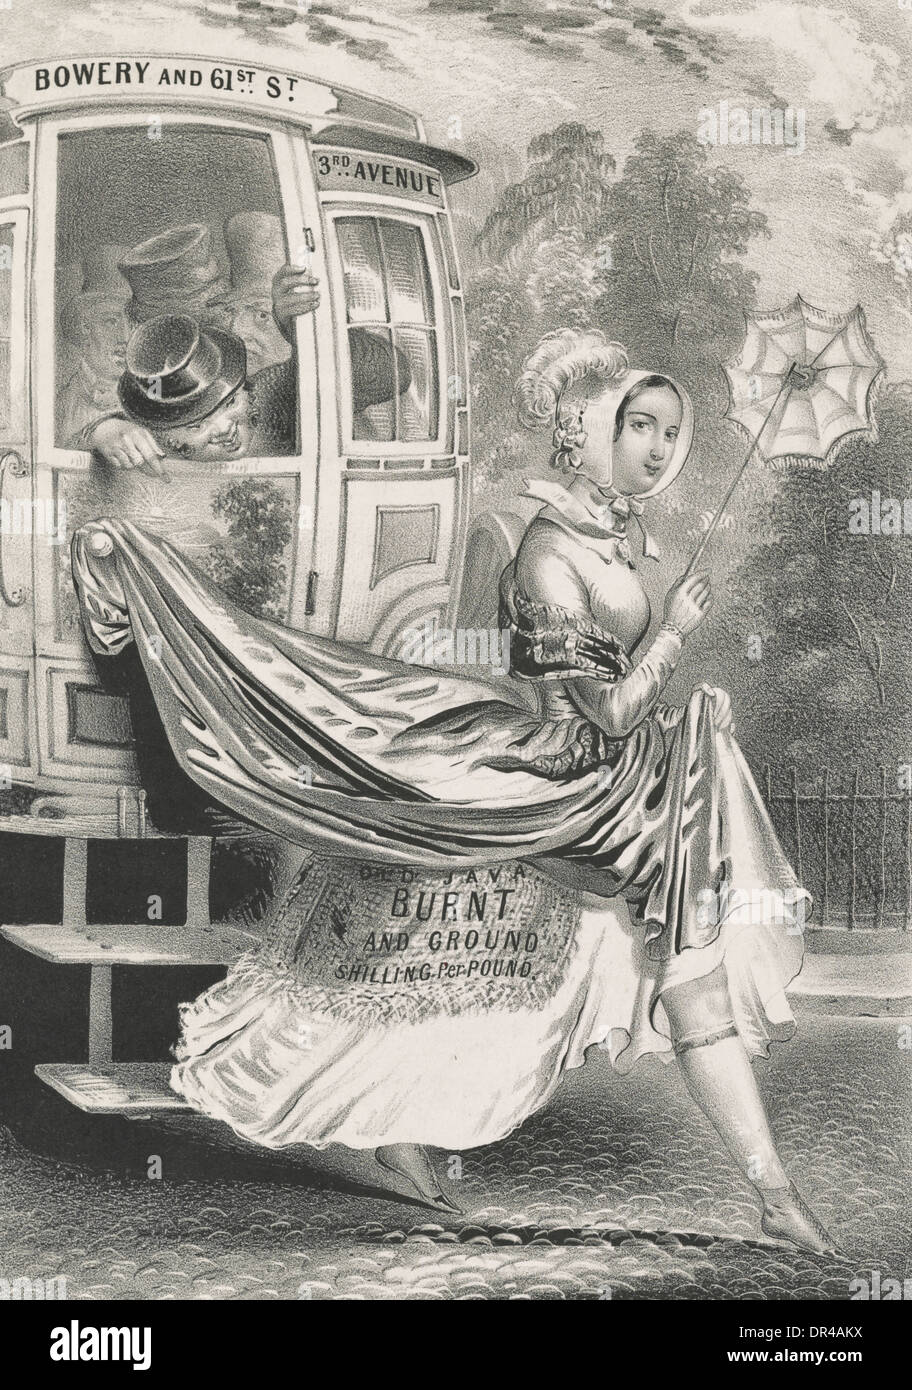 Inconvenience of wearing coffee bag skirts - A woman's dress is pulled up as she exits a streetcar, circa 1848 Stock Photo